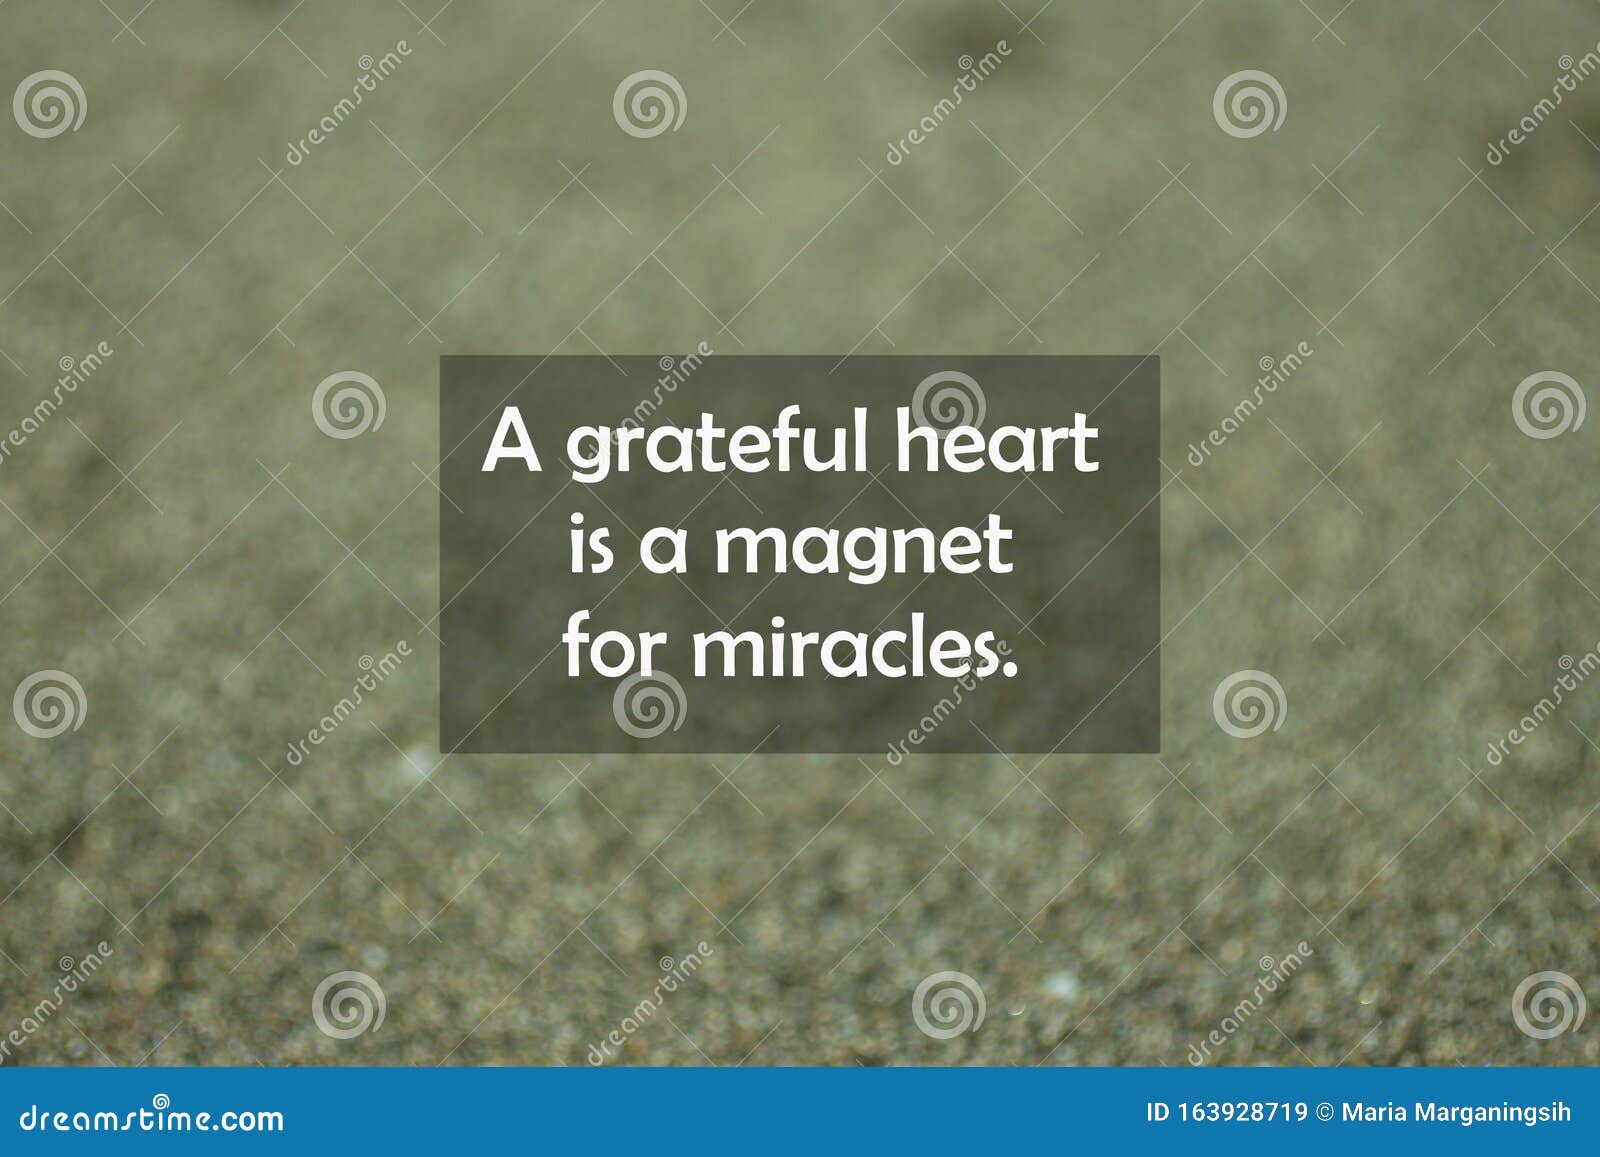 inspirational motivational quote - a grateful heart is a magnet for miracles. with blurry black sands pattern texture background.